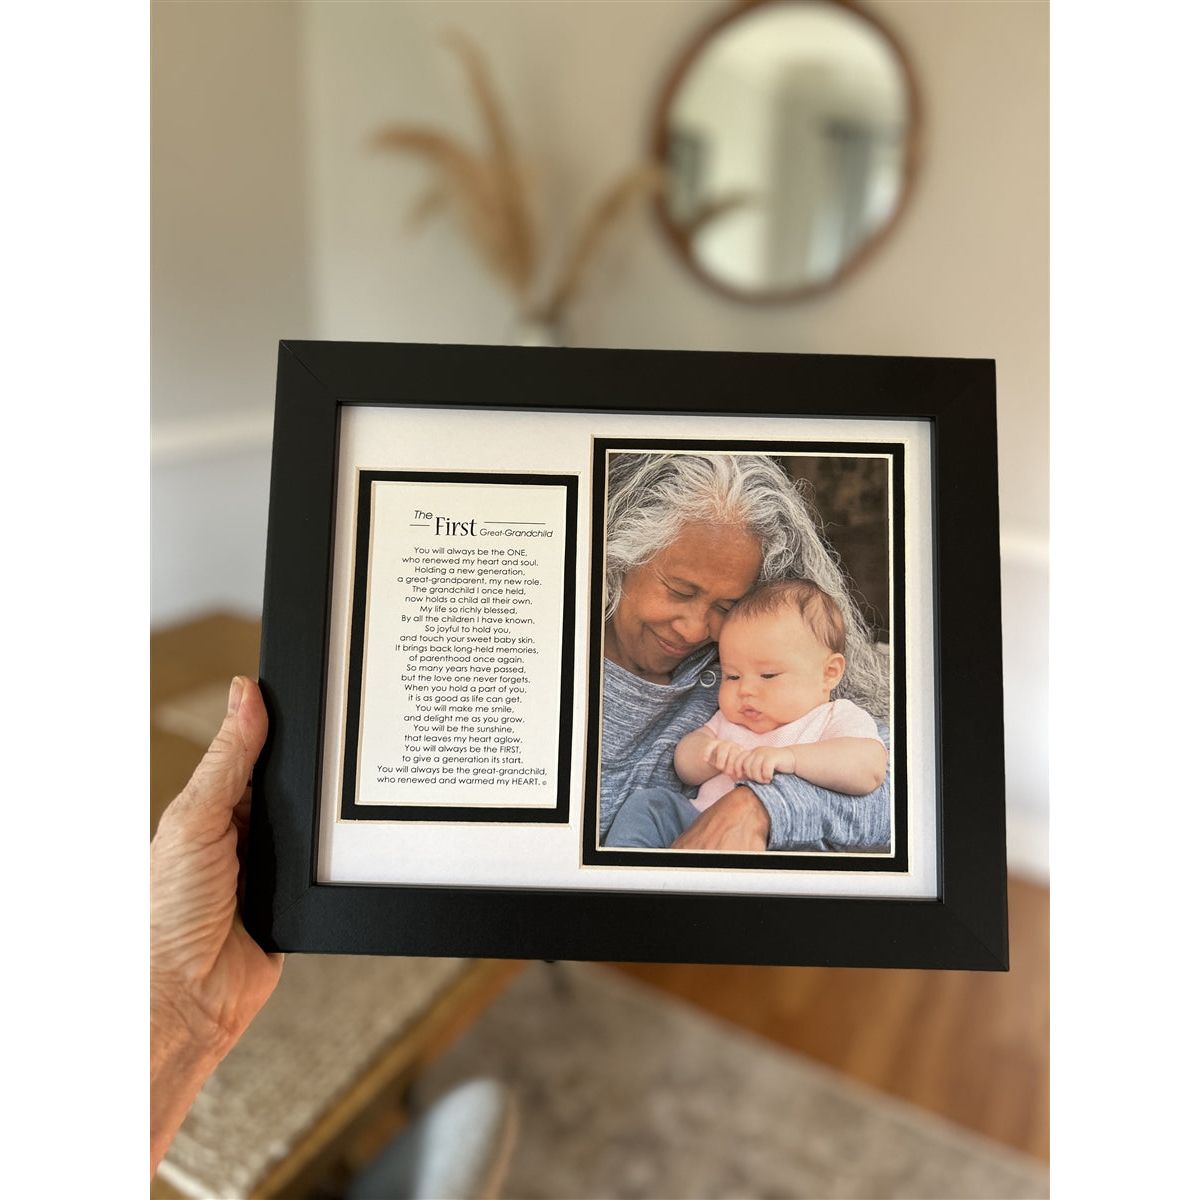 First Great-Grandchild frame being held in a hand.